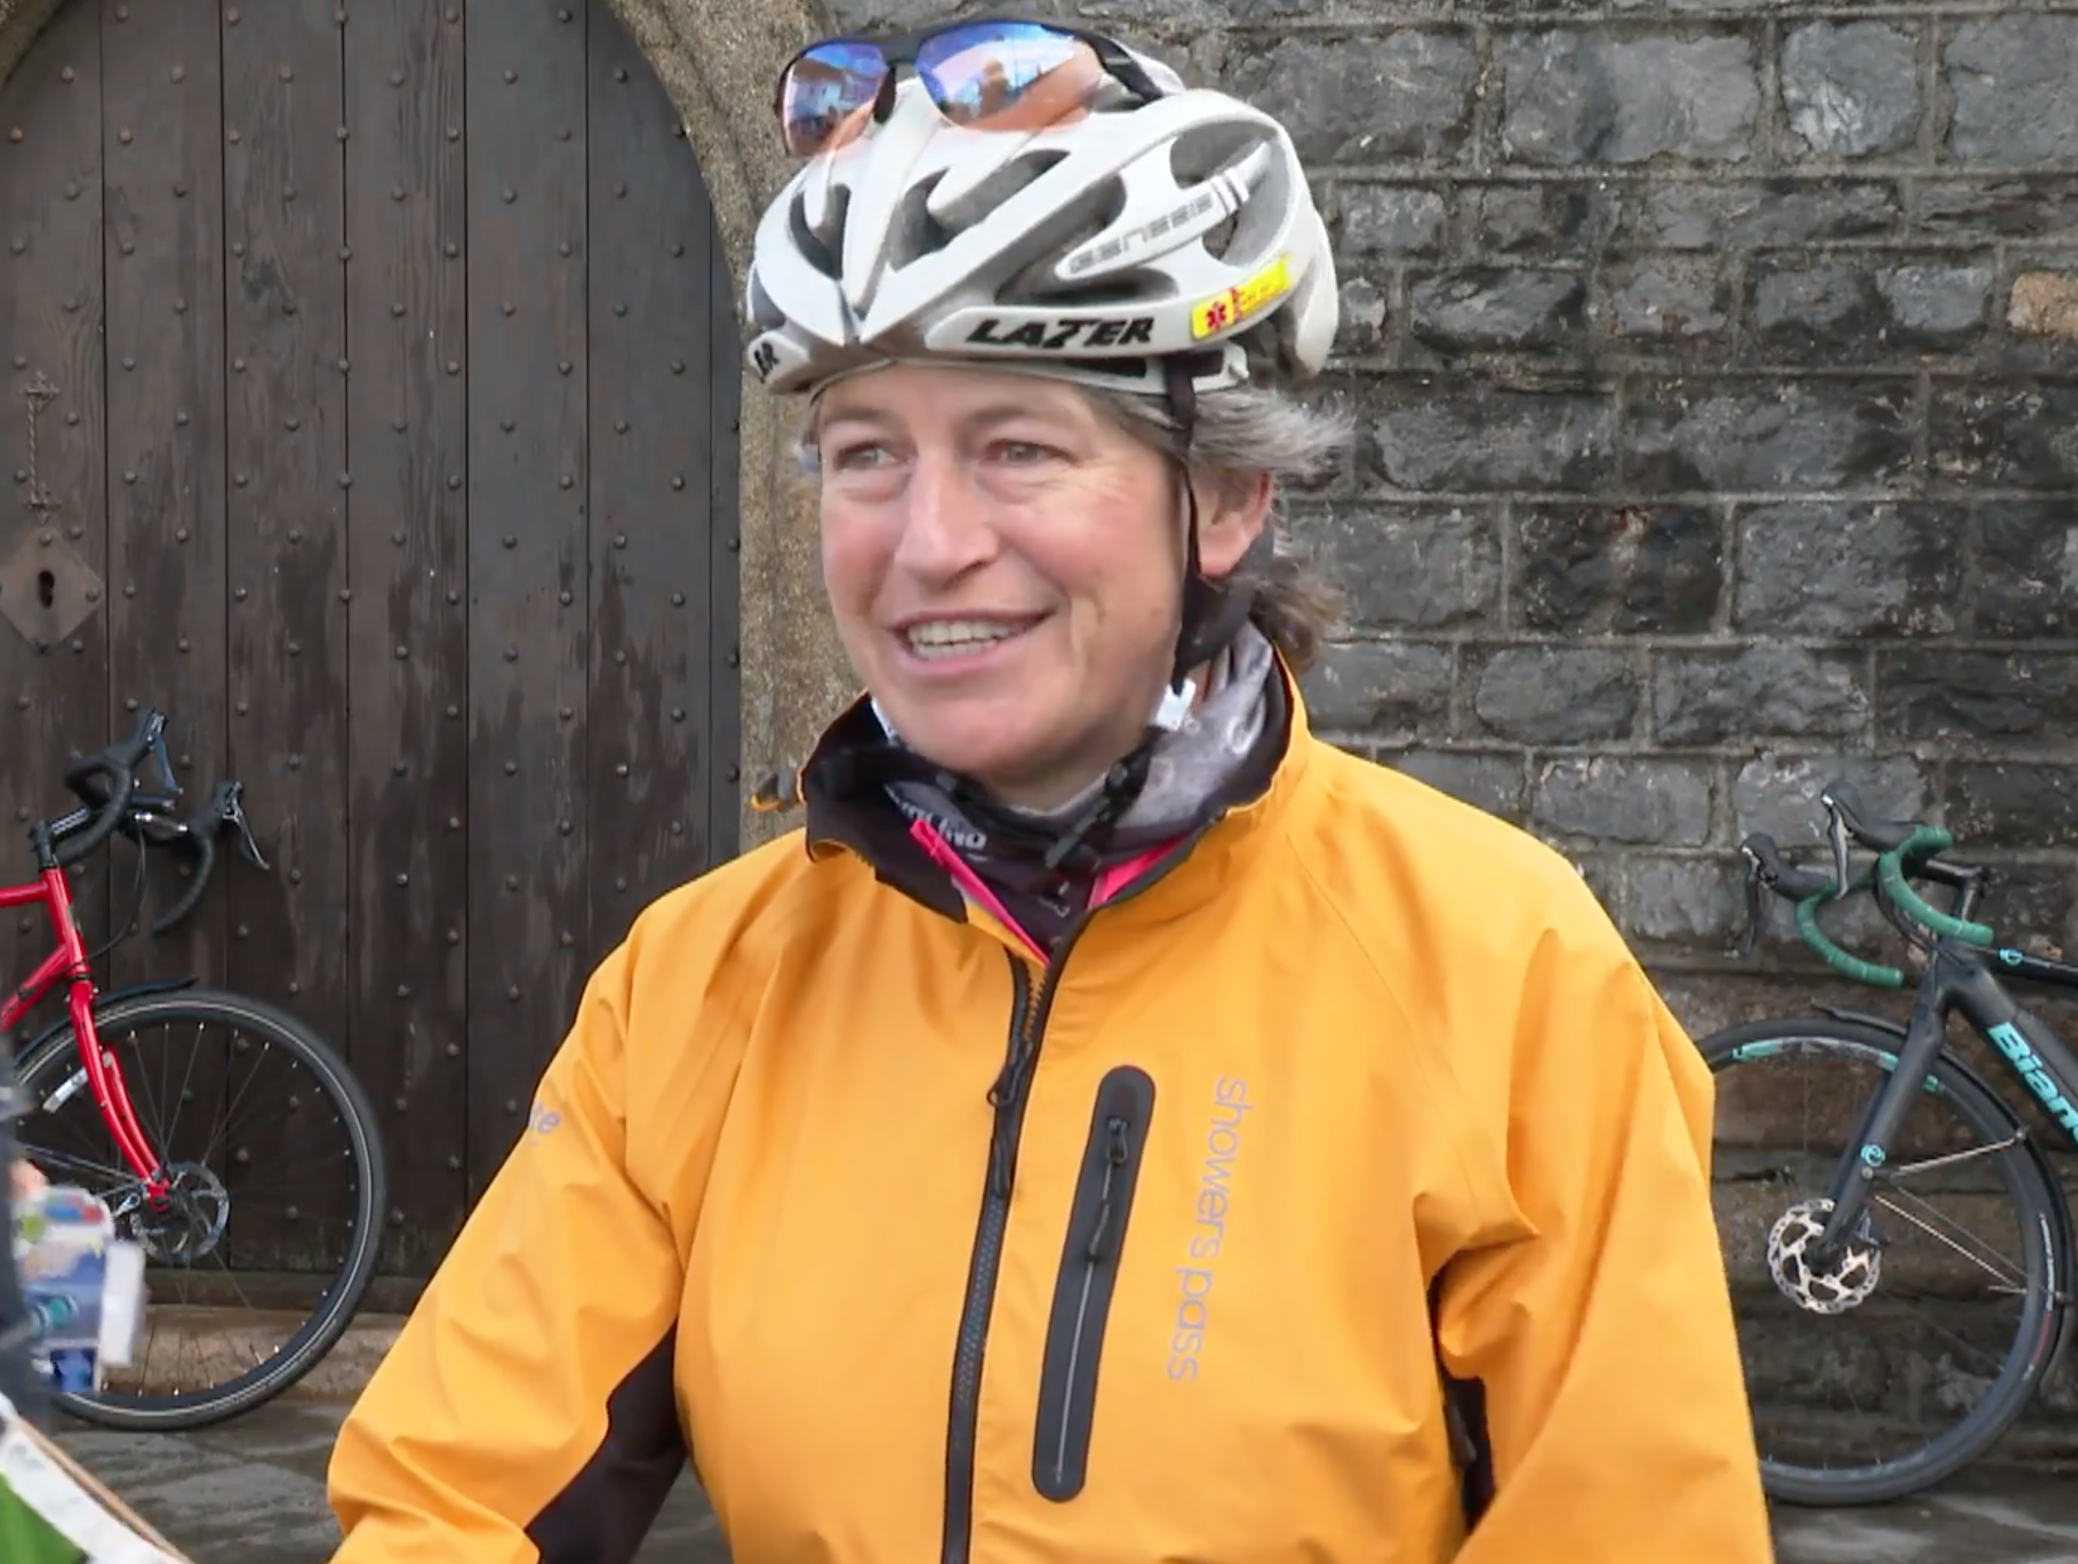 Above: The Eco-friendly Card Company office manager, Caroline Twigger shared her admiration of Jessie on ITV news and also cycled alongside her for the first part of the journey.